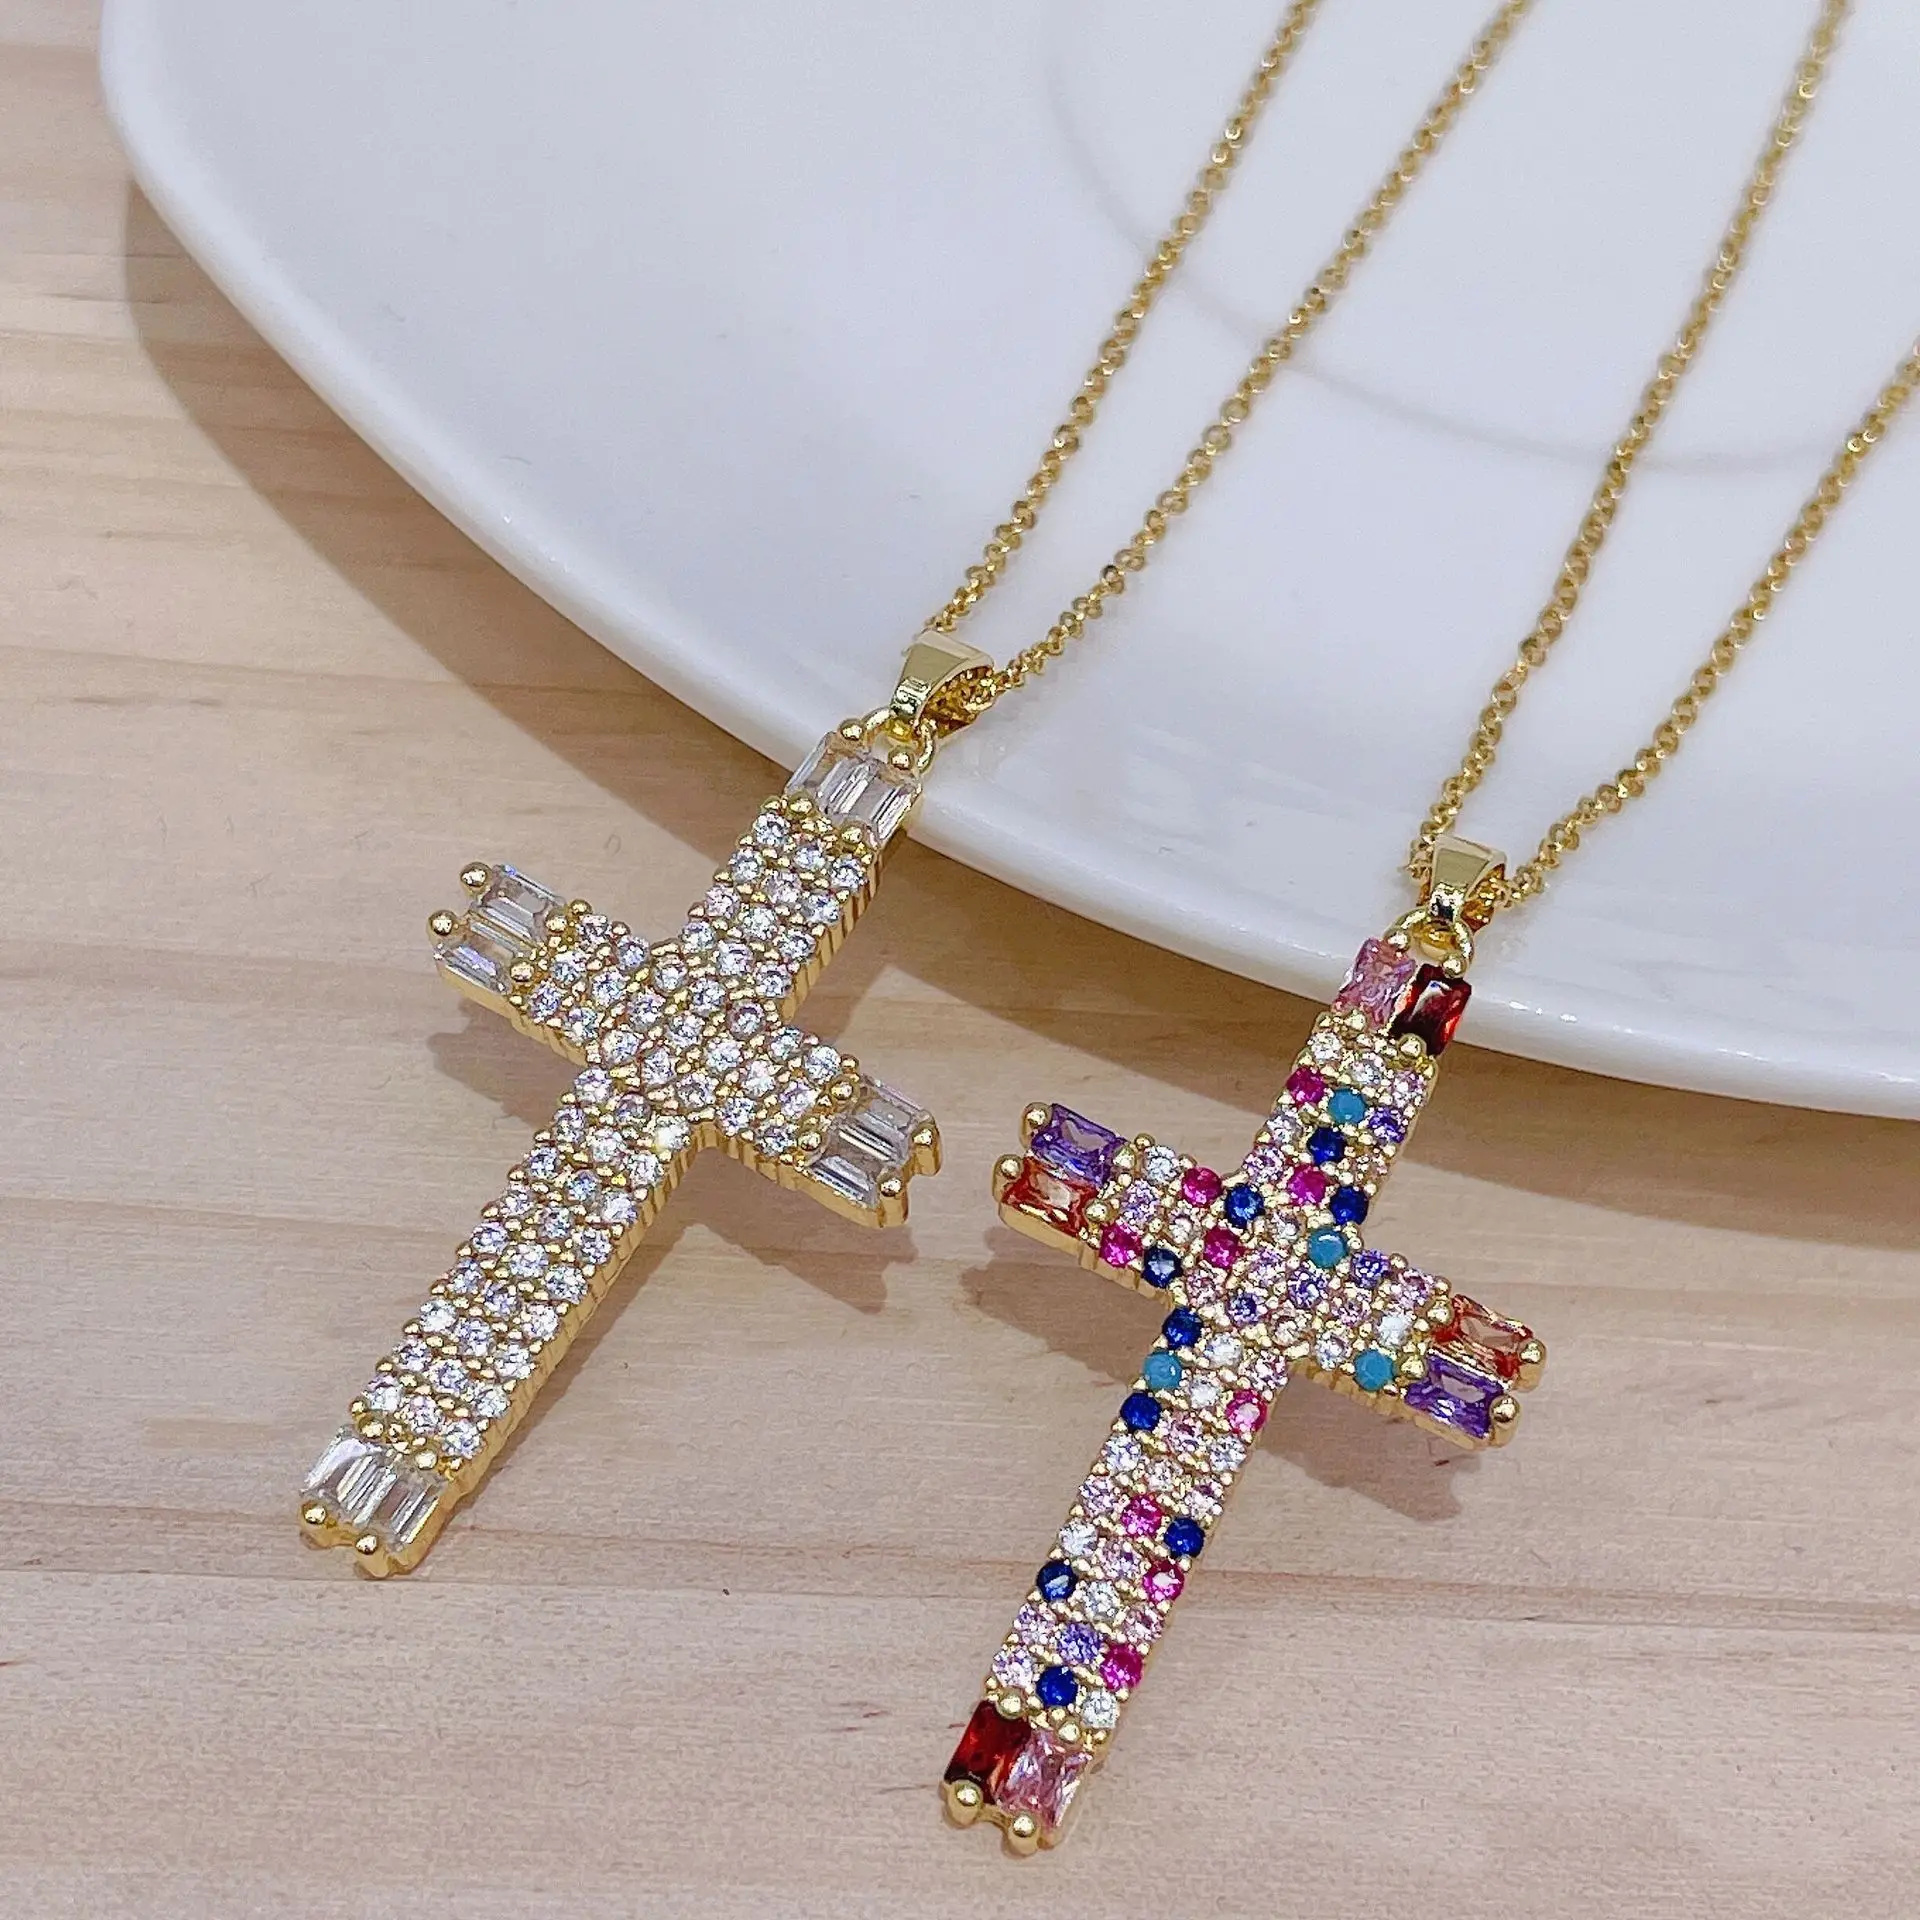 

Pendants and Necklaces for Men Delicate Colorful Jewelry Crystal Jesus Cross Necklace Pendant Clavicle Chain Vintage Gothic Kpop